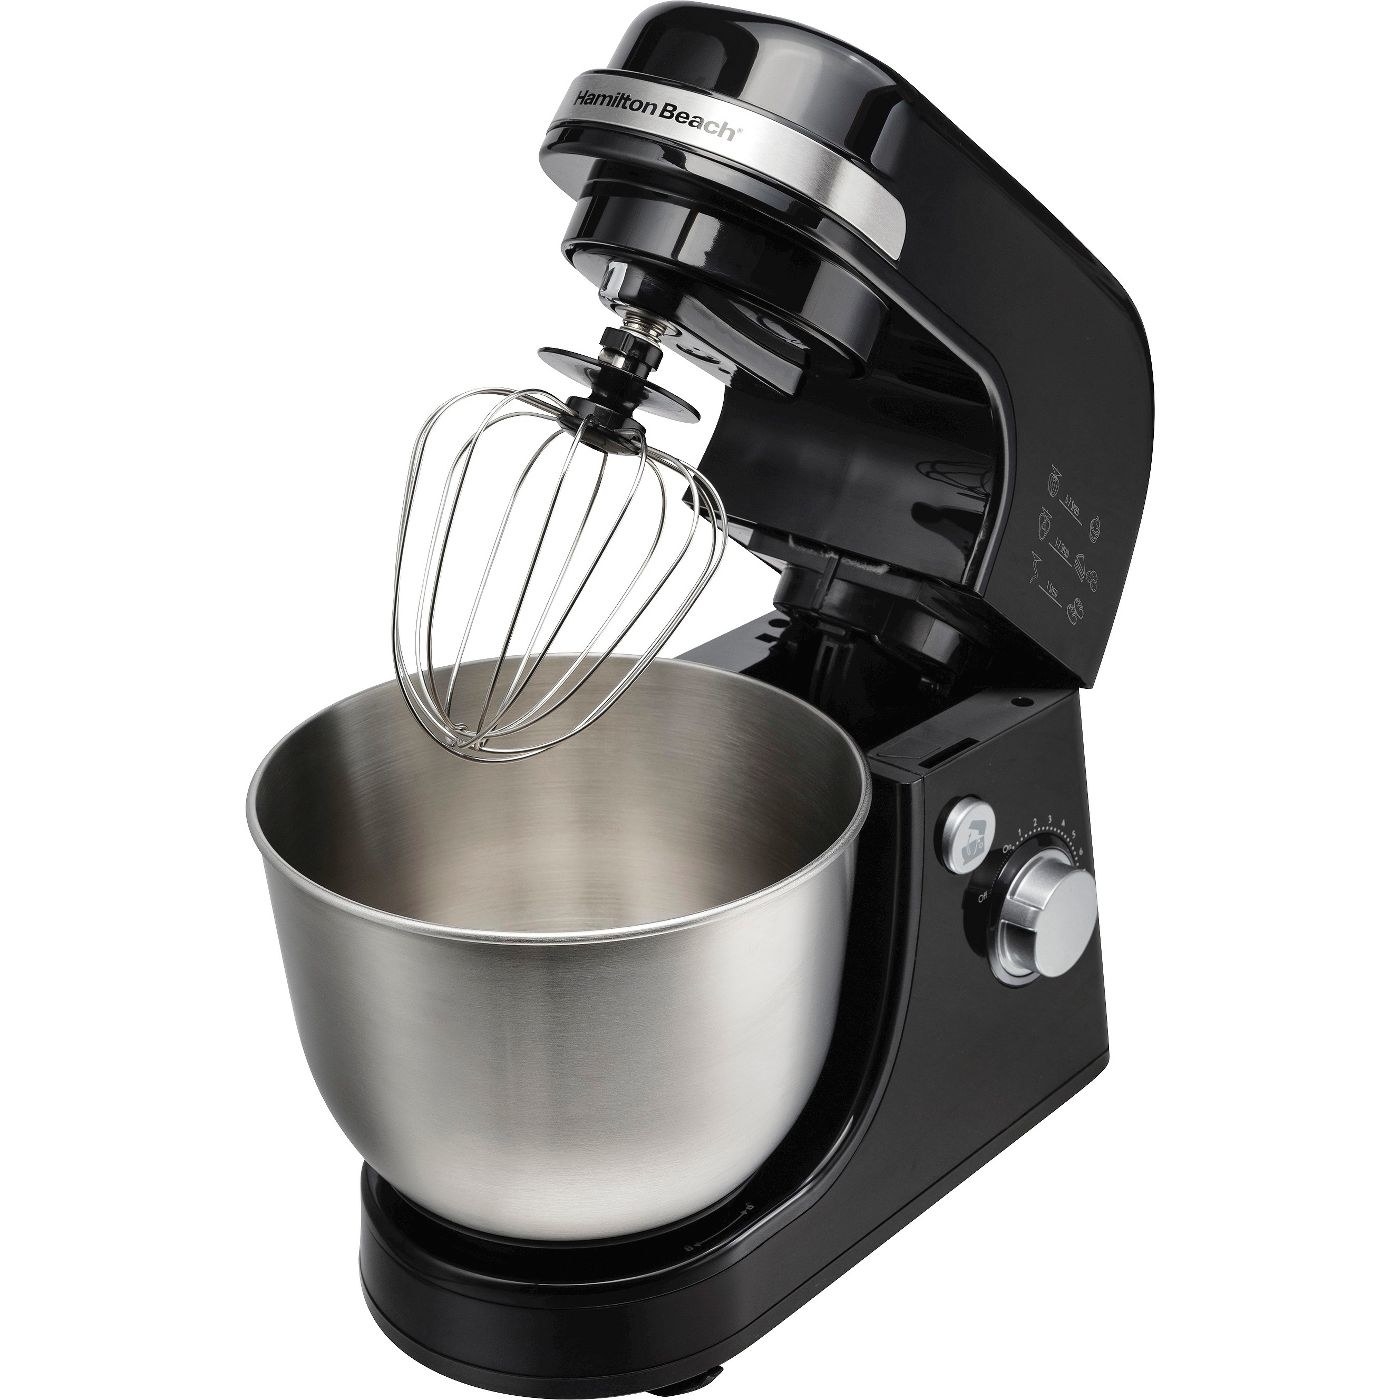 The standing mixer